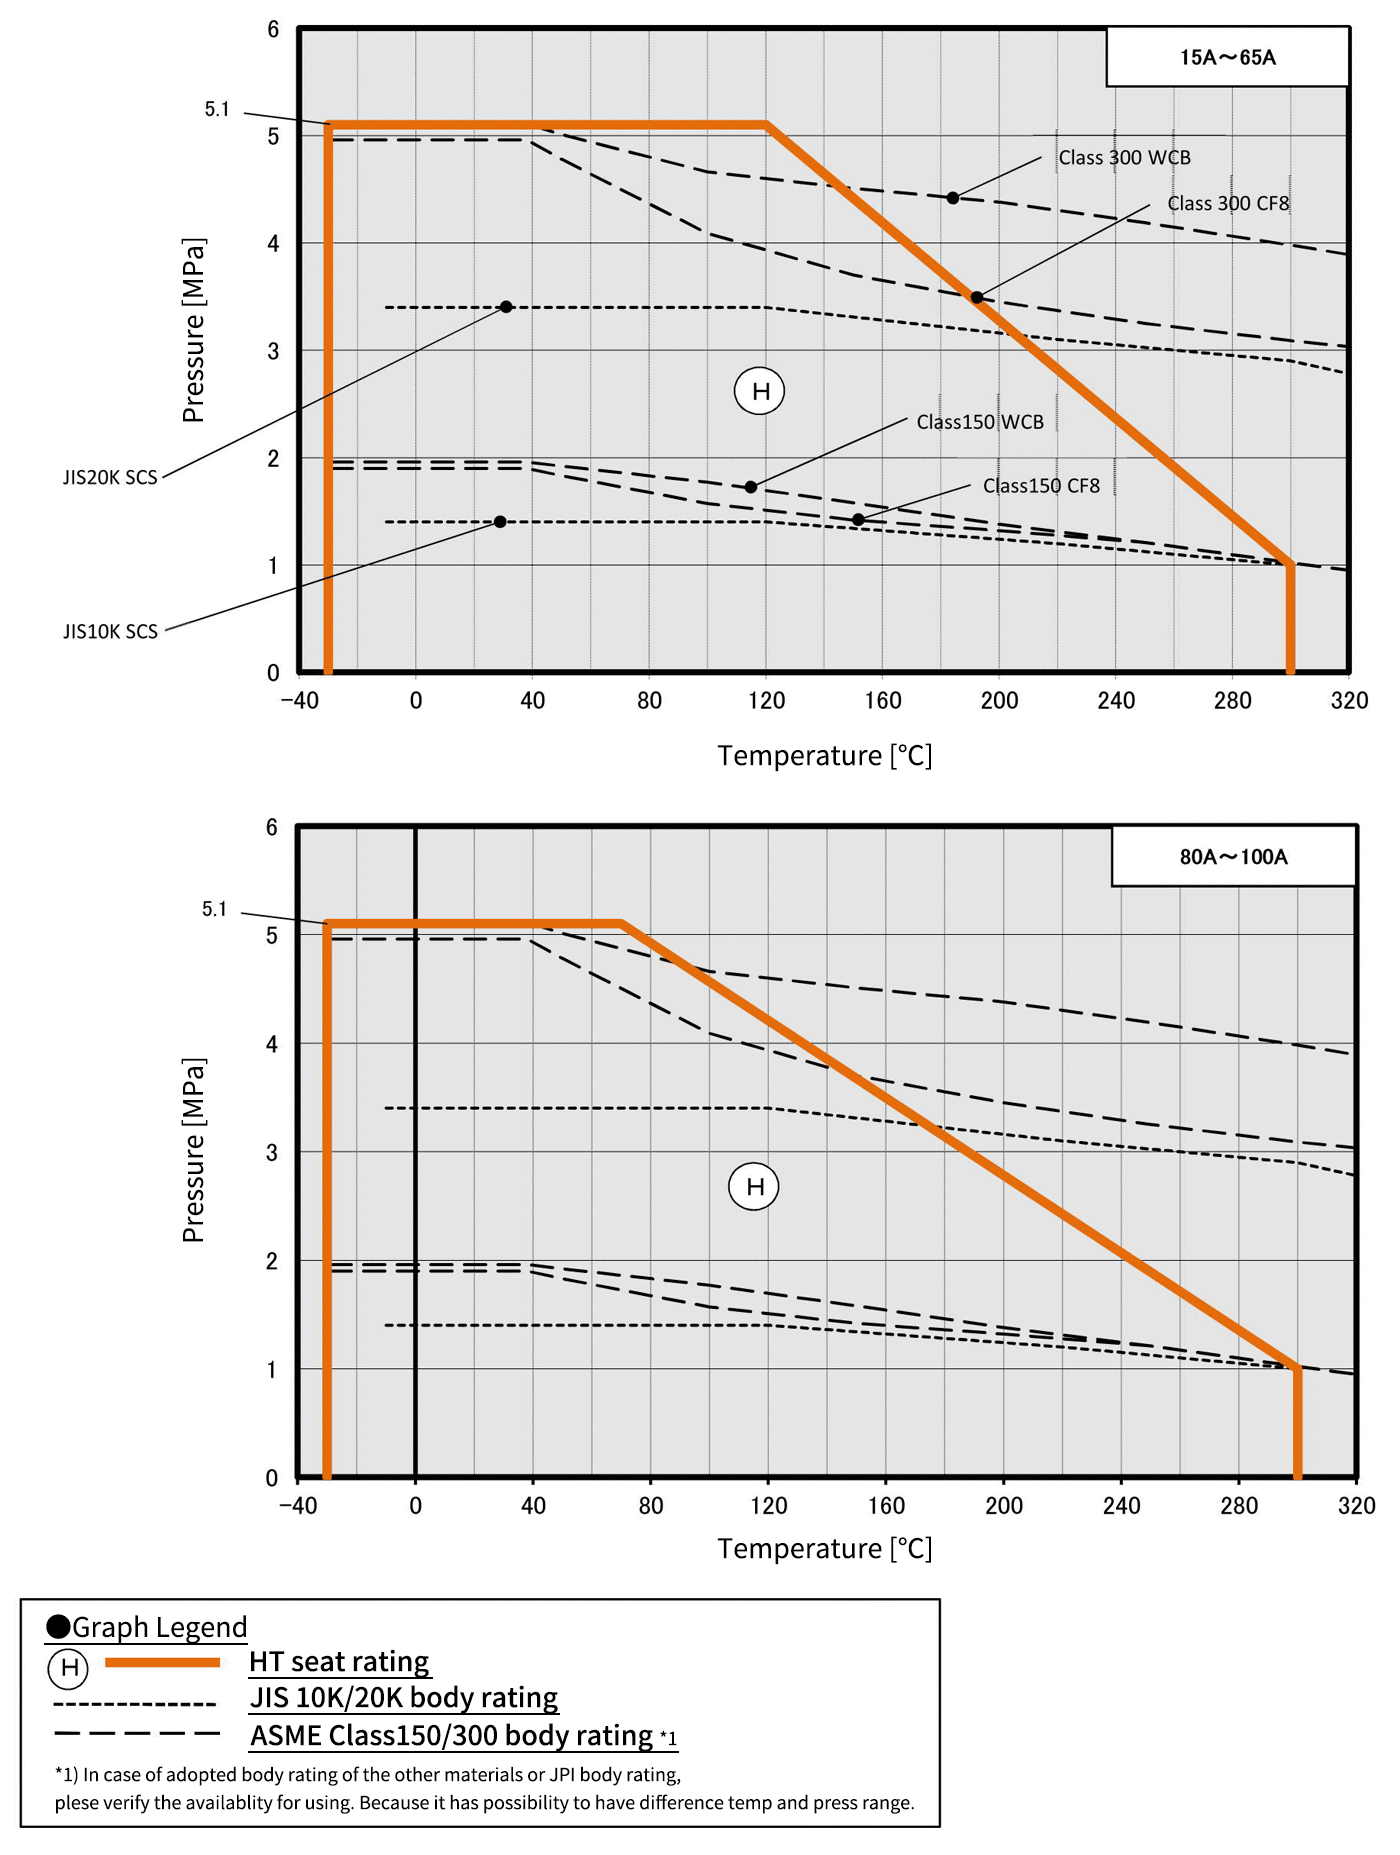 Temperature and pressure rating of PTFE ball seats (Strengthened for use at 300°C)